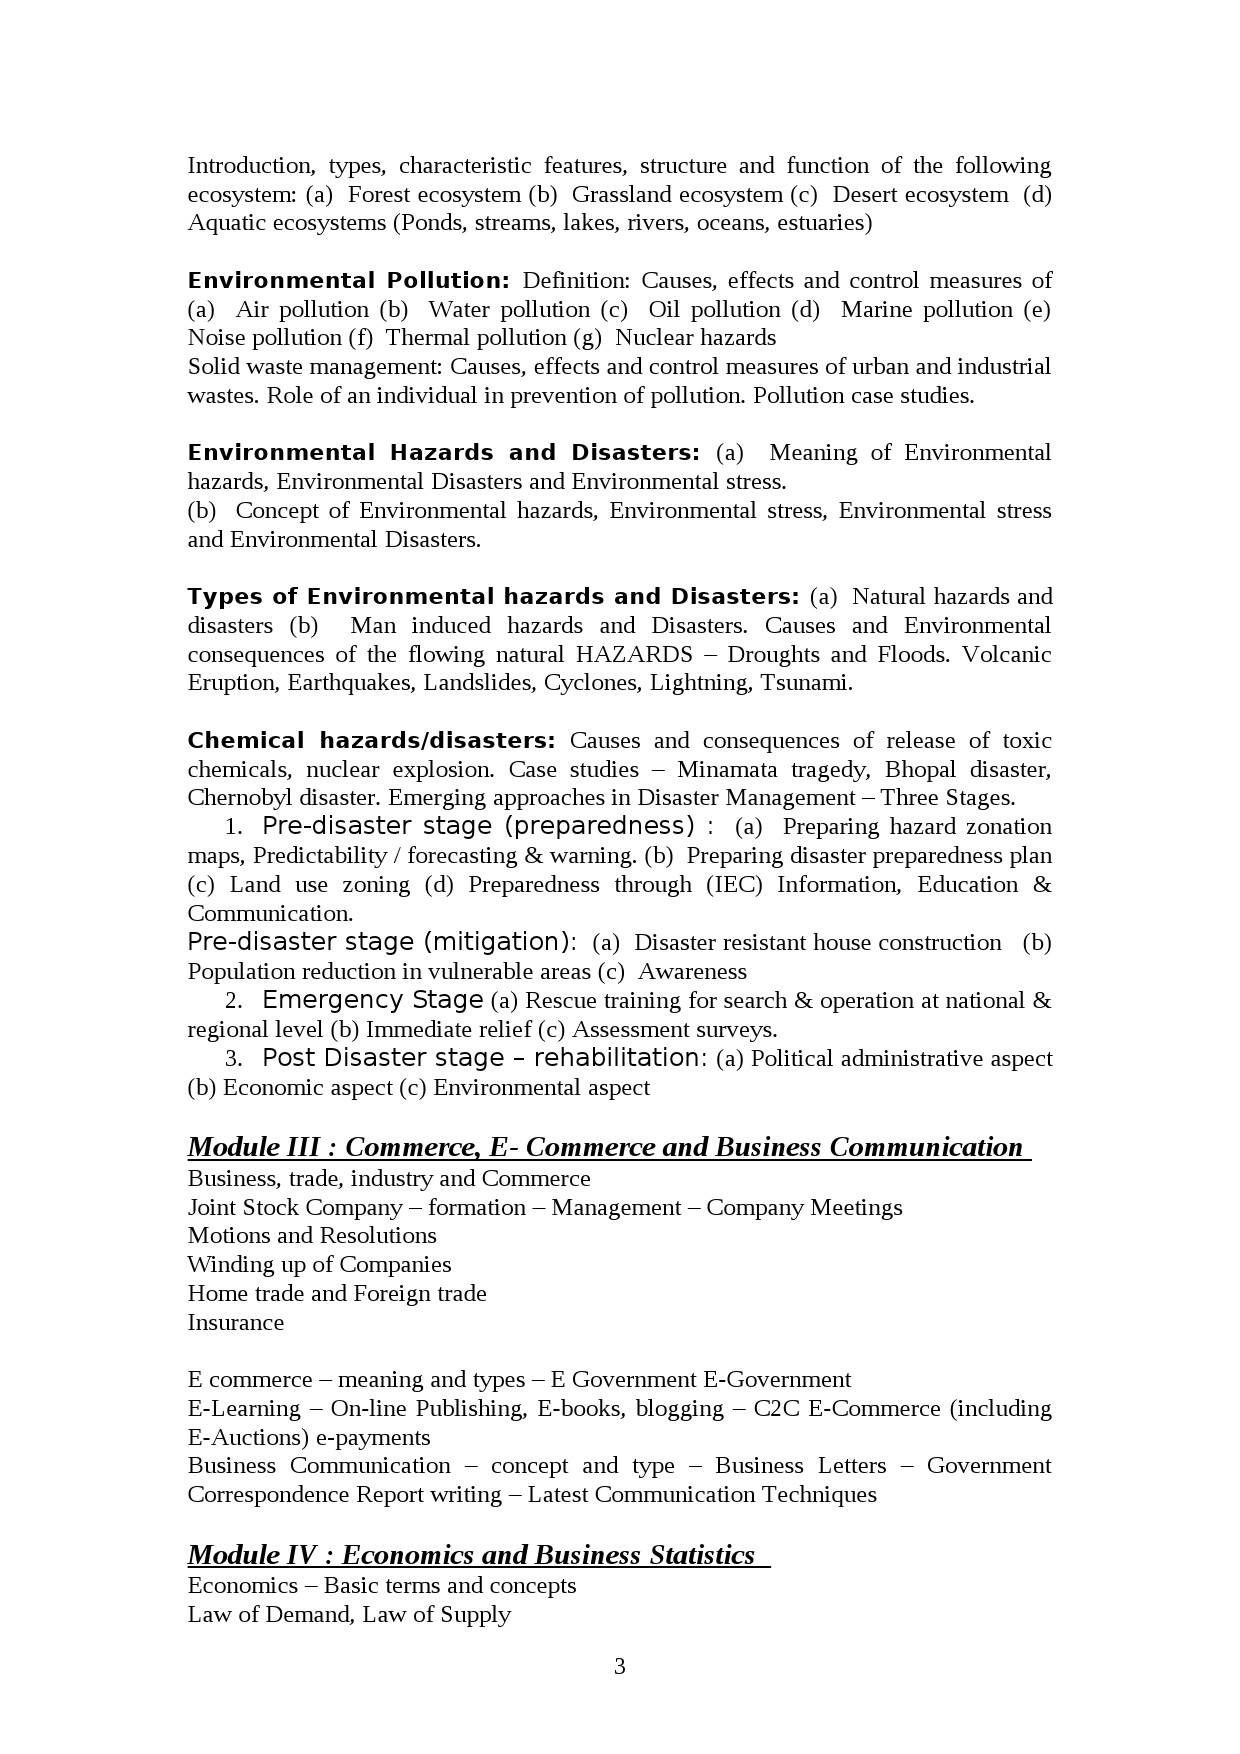 Commercial Practice Lecturer in Polytechnic Exam Syllabus - Notification Image 3